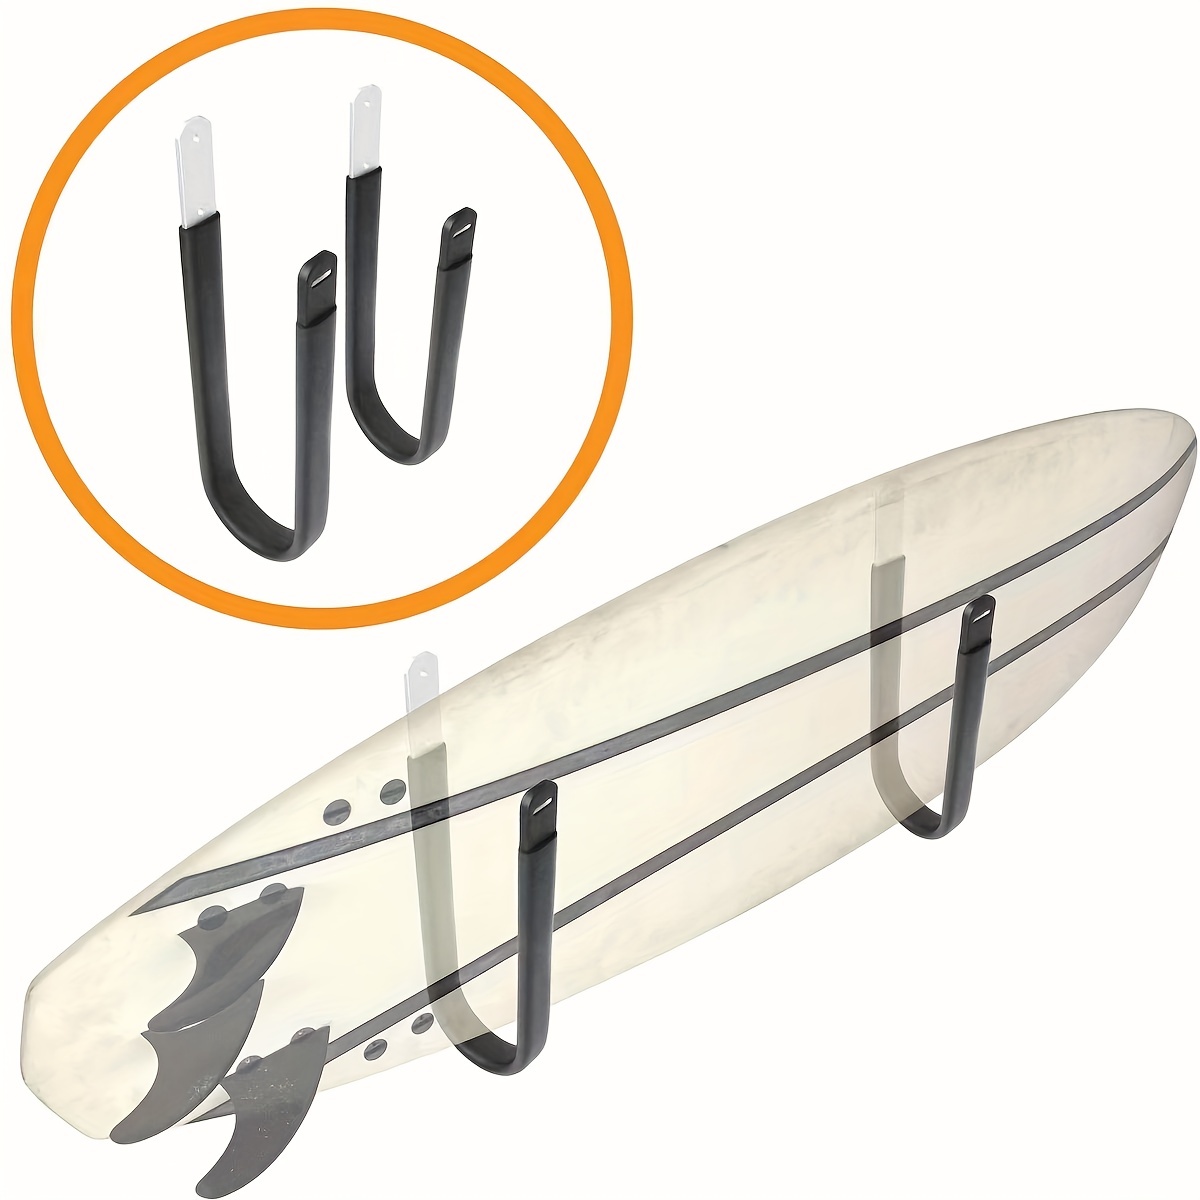 Support mural pour wakeboard, support mural de skateboard, support